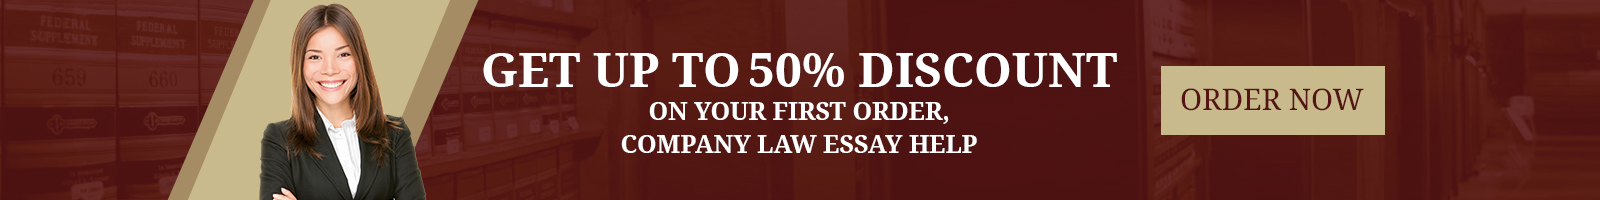 Company Business Law Essay Help